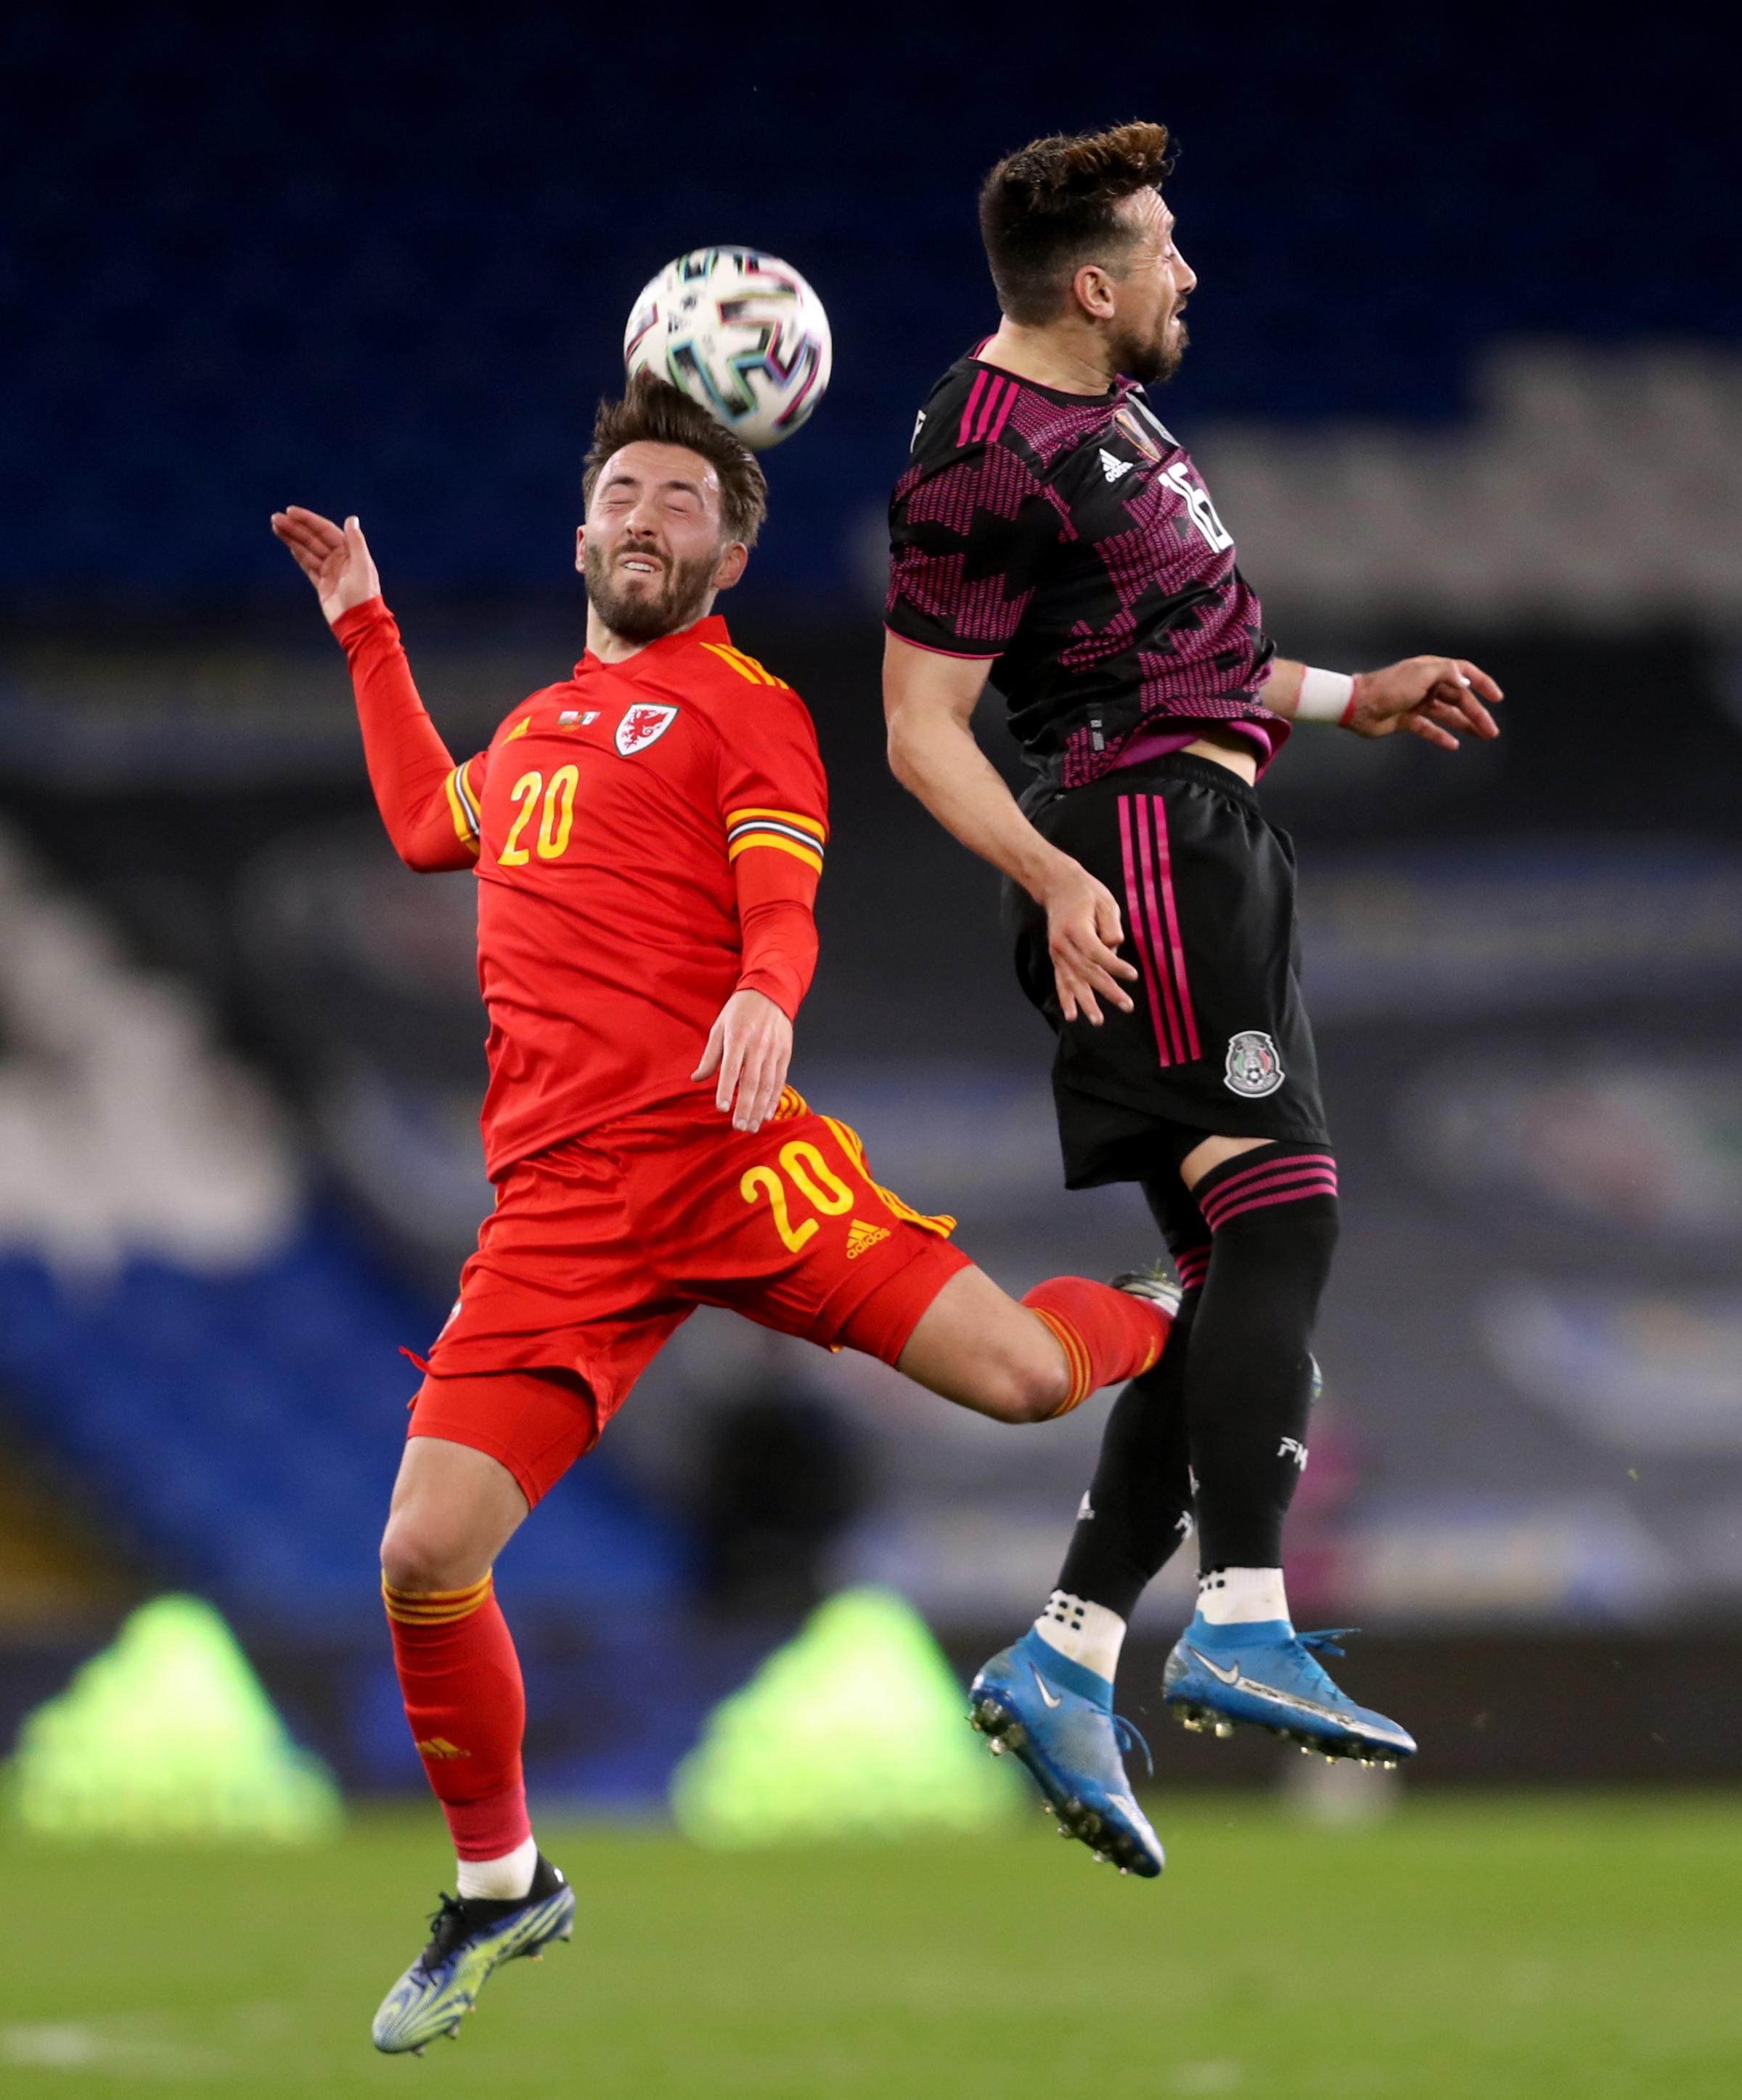 Wales Josh Sheehan (left) and Mexicos Hector Herrera battle for the ball during the international friendly at the Cardiff City Stadium, Cardiff. Picture date: Saturday March 27, 2021..